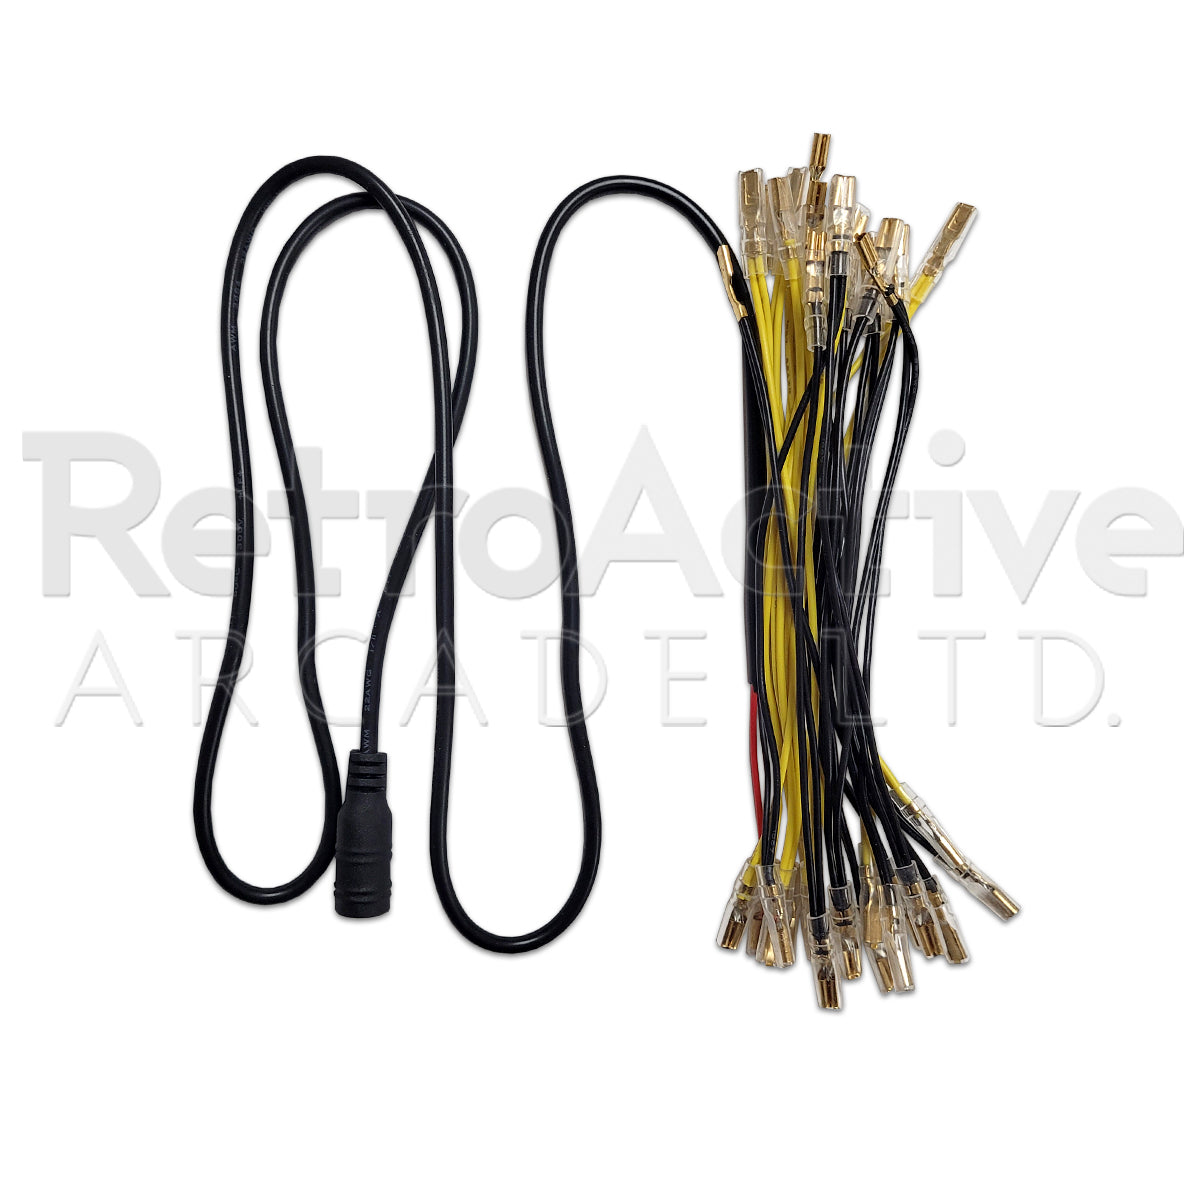 12V LED 18 PIN Wiring Harness .110" (Barrel Connector) Wiring & Harnesses Universal - Retro Active Arcade